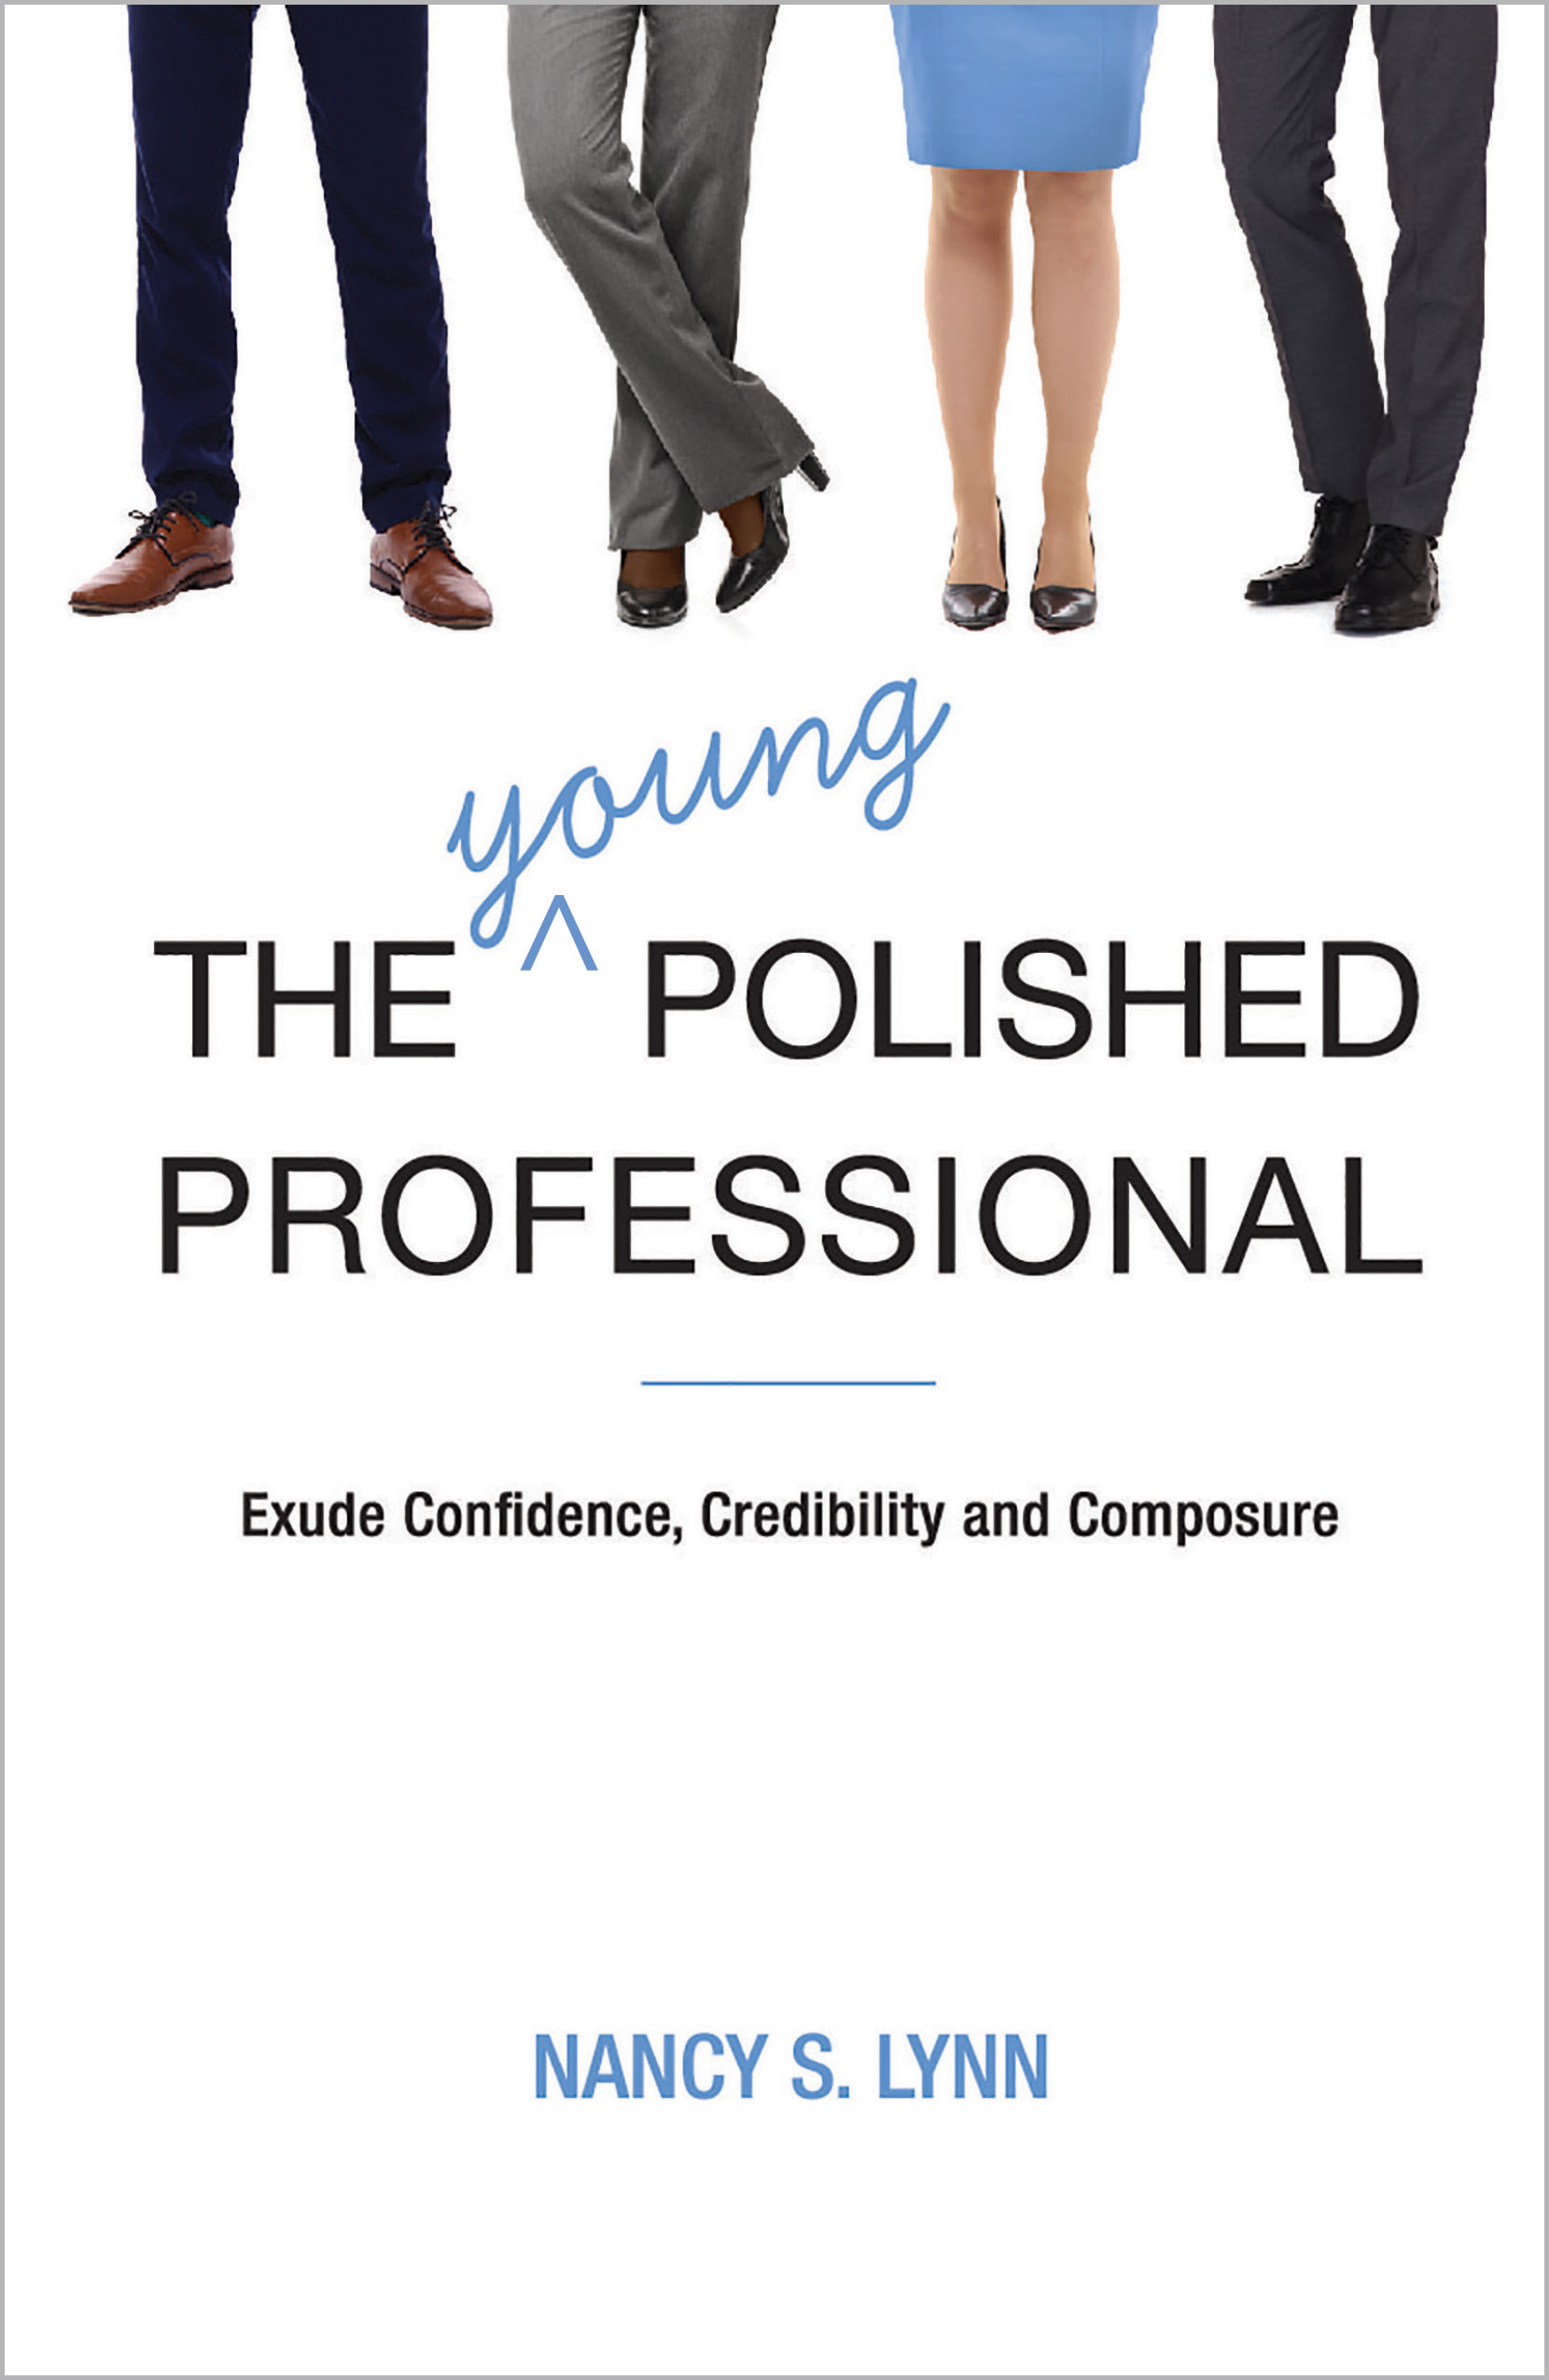 The Young Polished Professional Book Cover